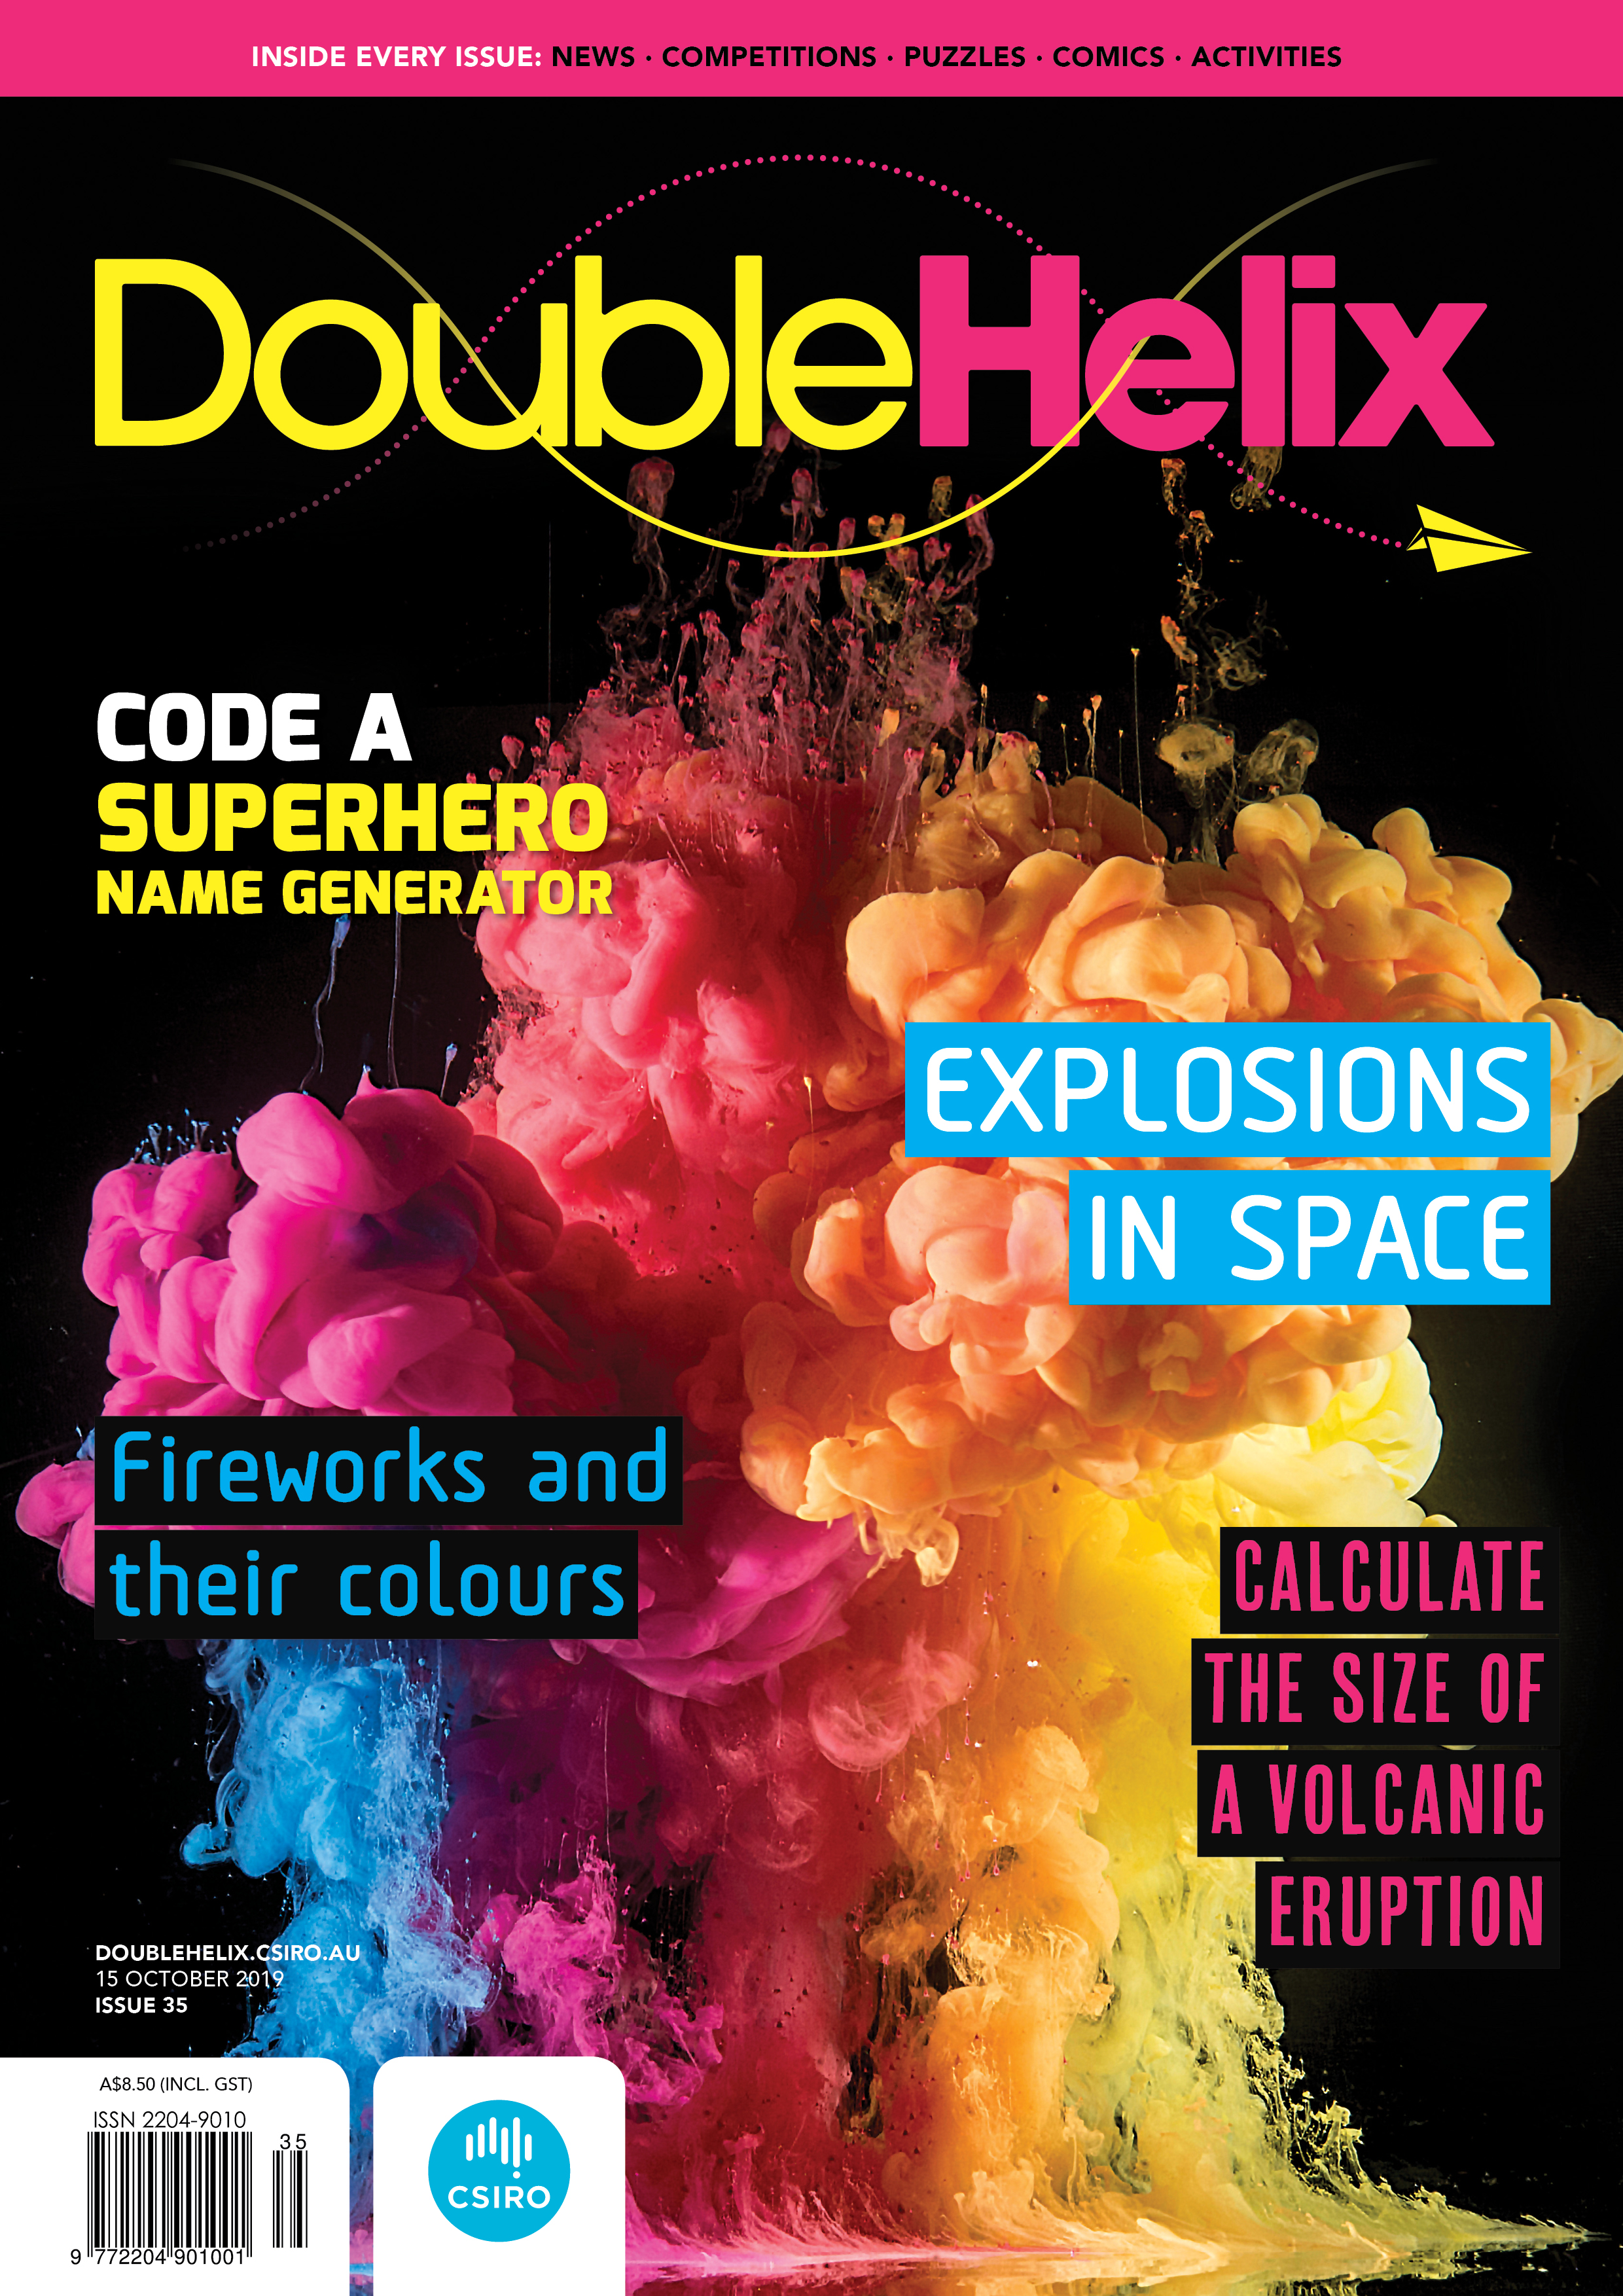 Cover of Double Helix magazine Issue 35 showing clouds of different coloured pigment on a black background.